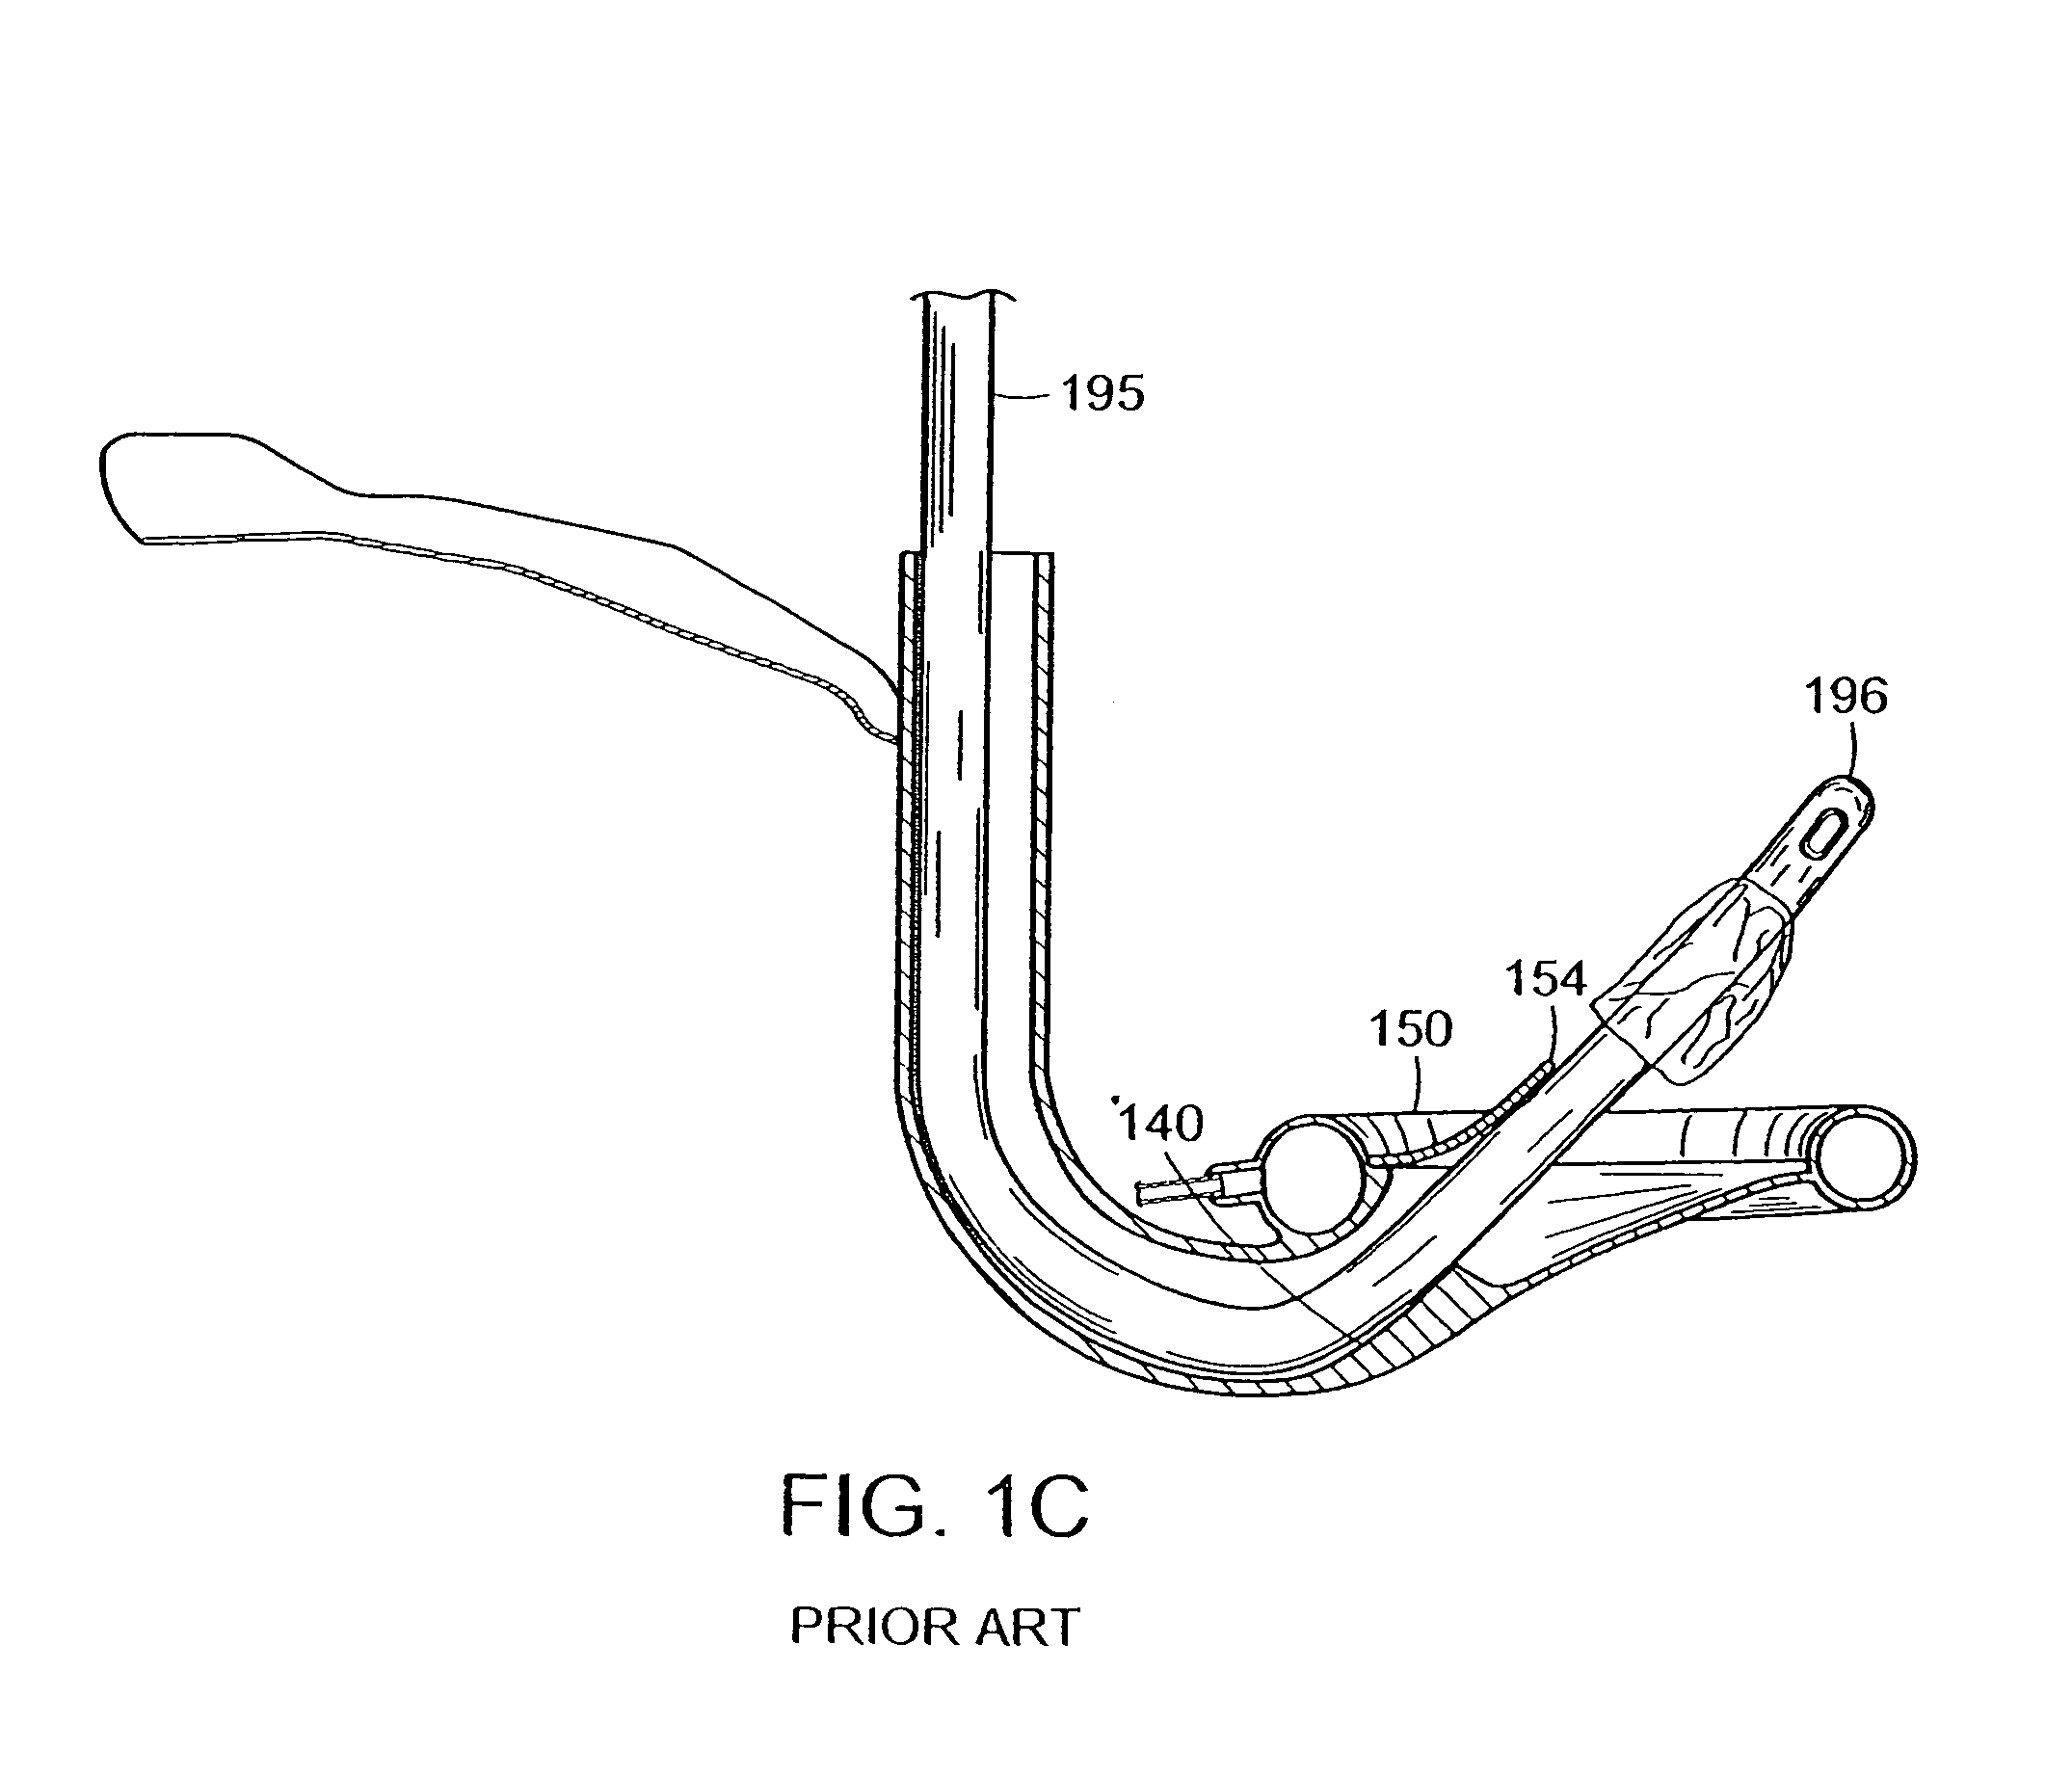 Intubating laryngeal mask airway device with fiber optic assembly